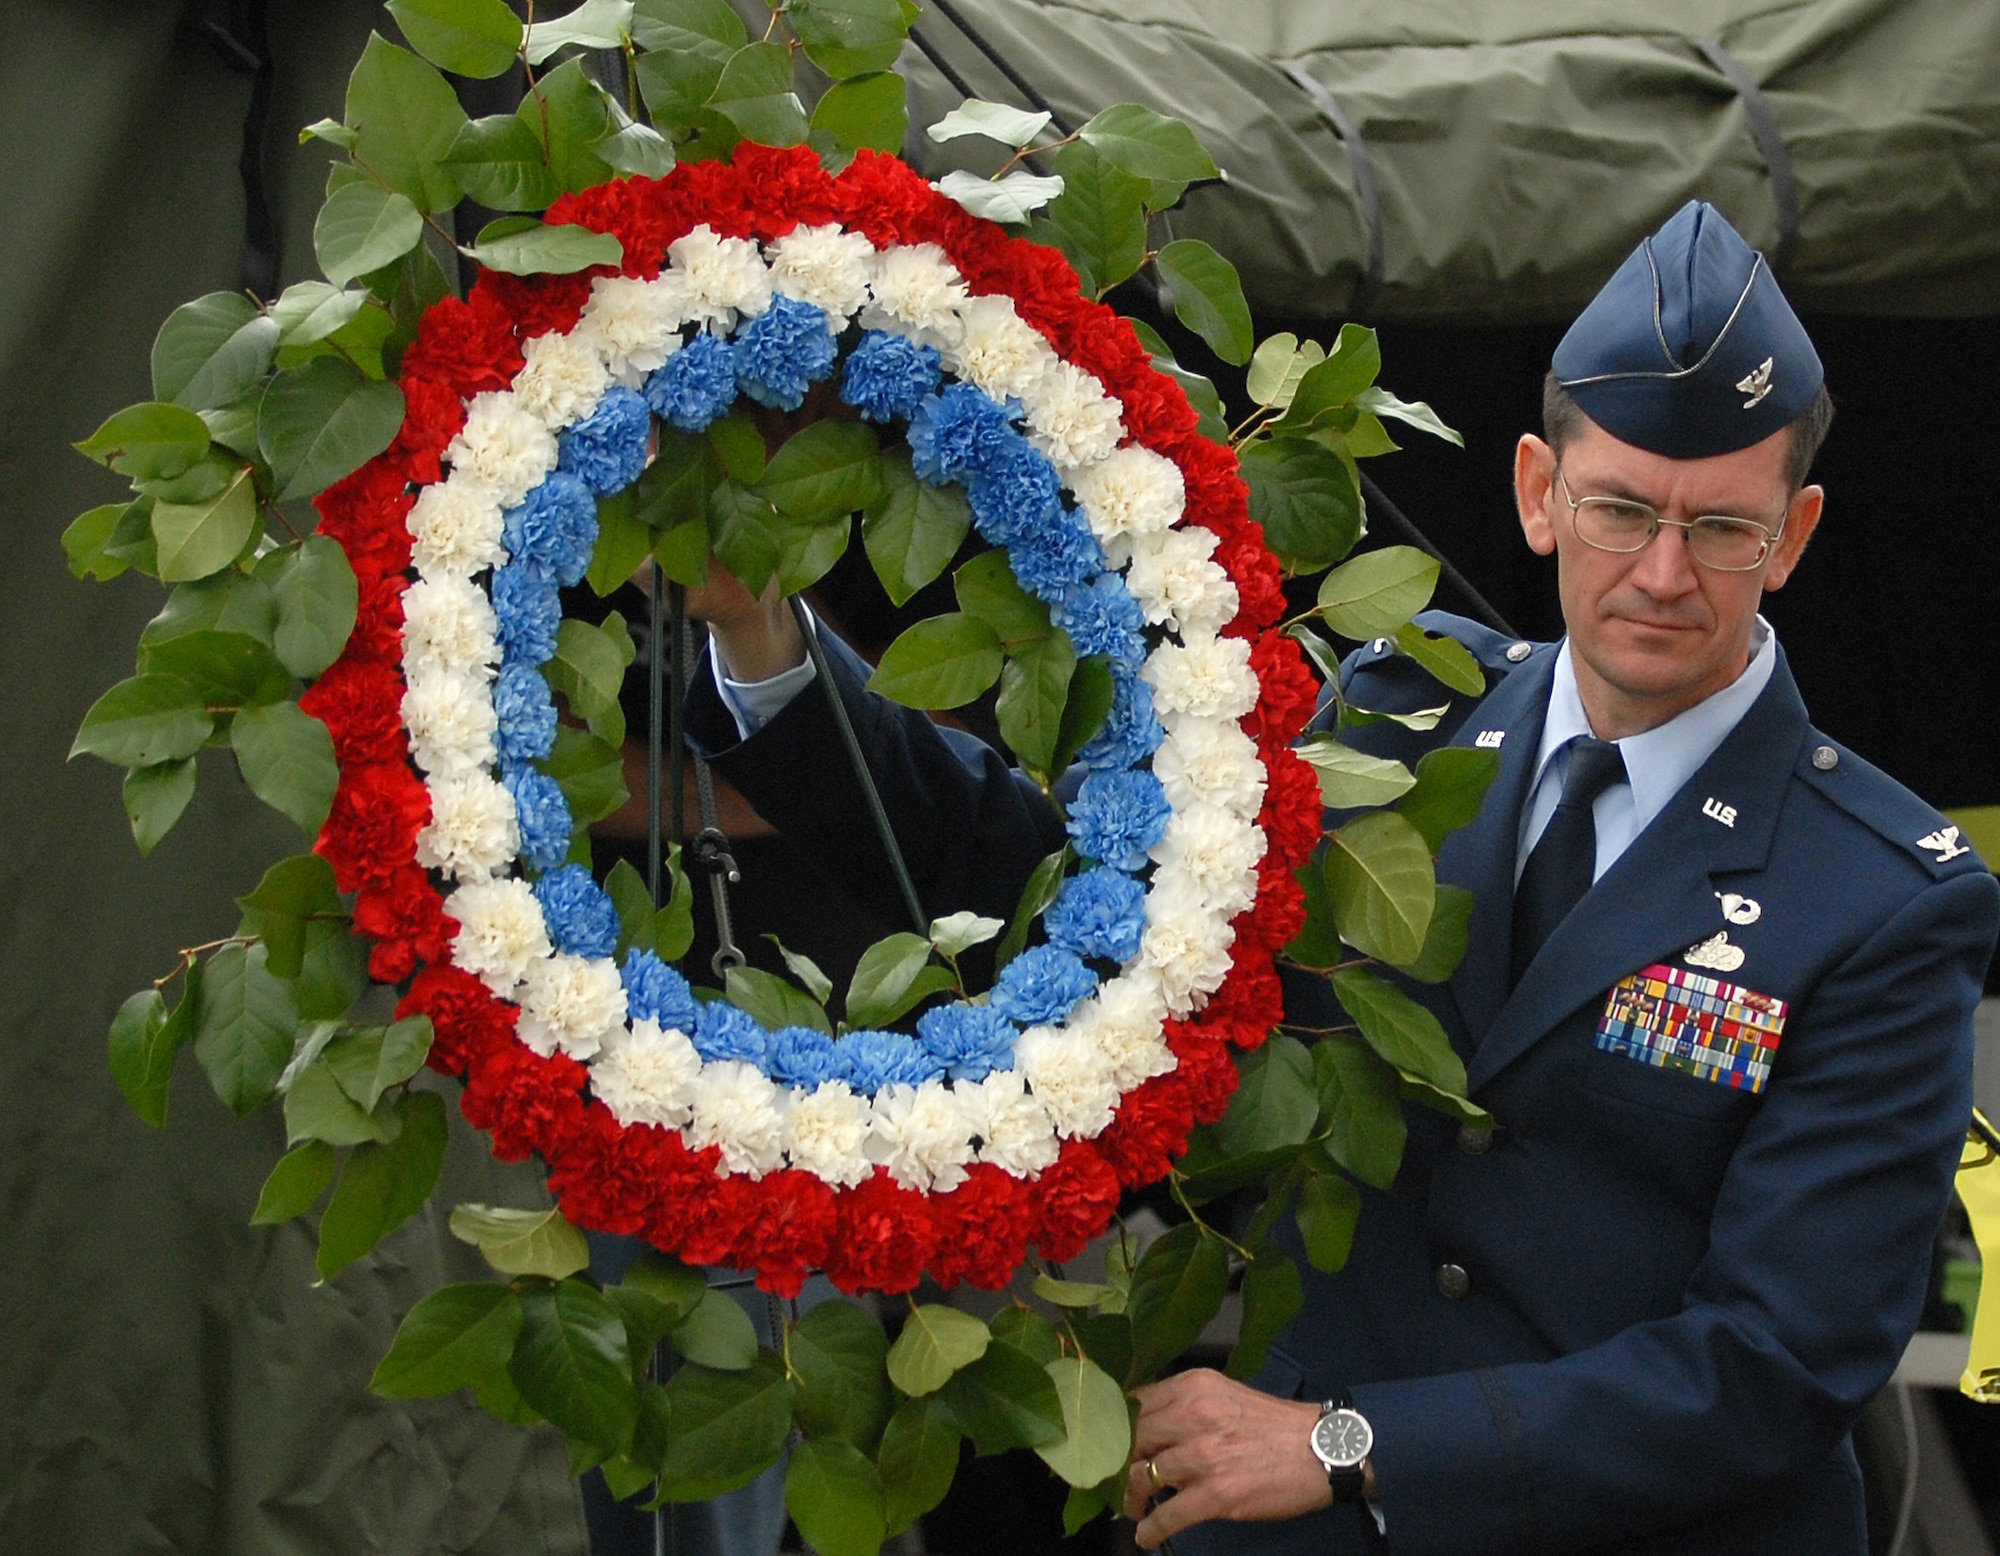 61st Air Base Wing Commander Col. Joseph Schwarz lays a wreath in remembrance of military dead at the annual Memorial Day observance at Green Hills Memorial Park in Rolling Hills, May 26. (Photo by Stephen Schester)